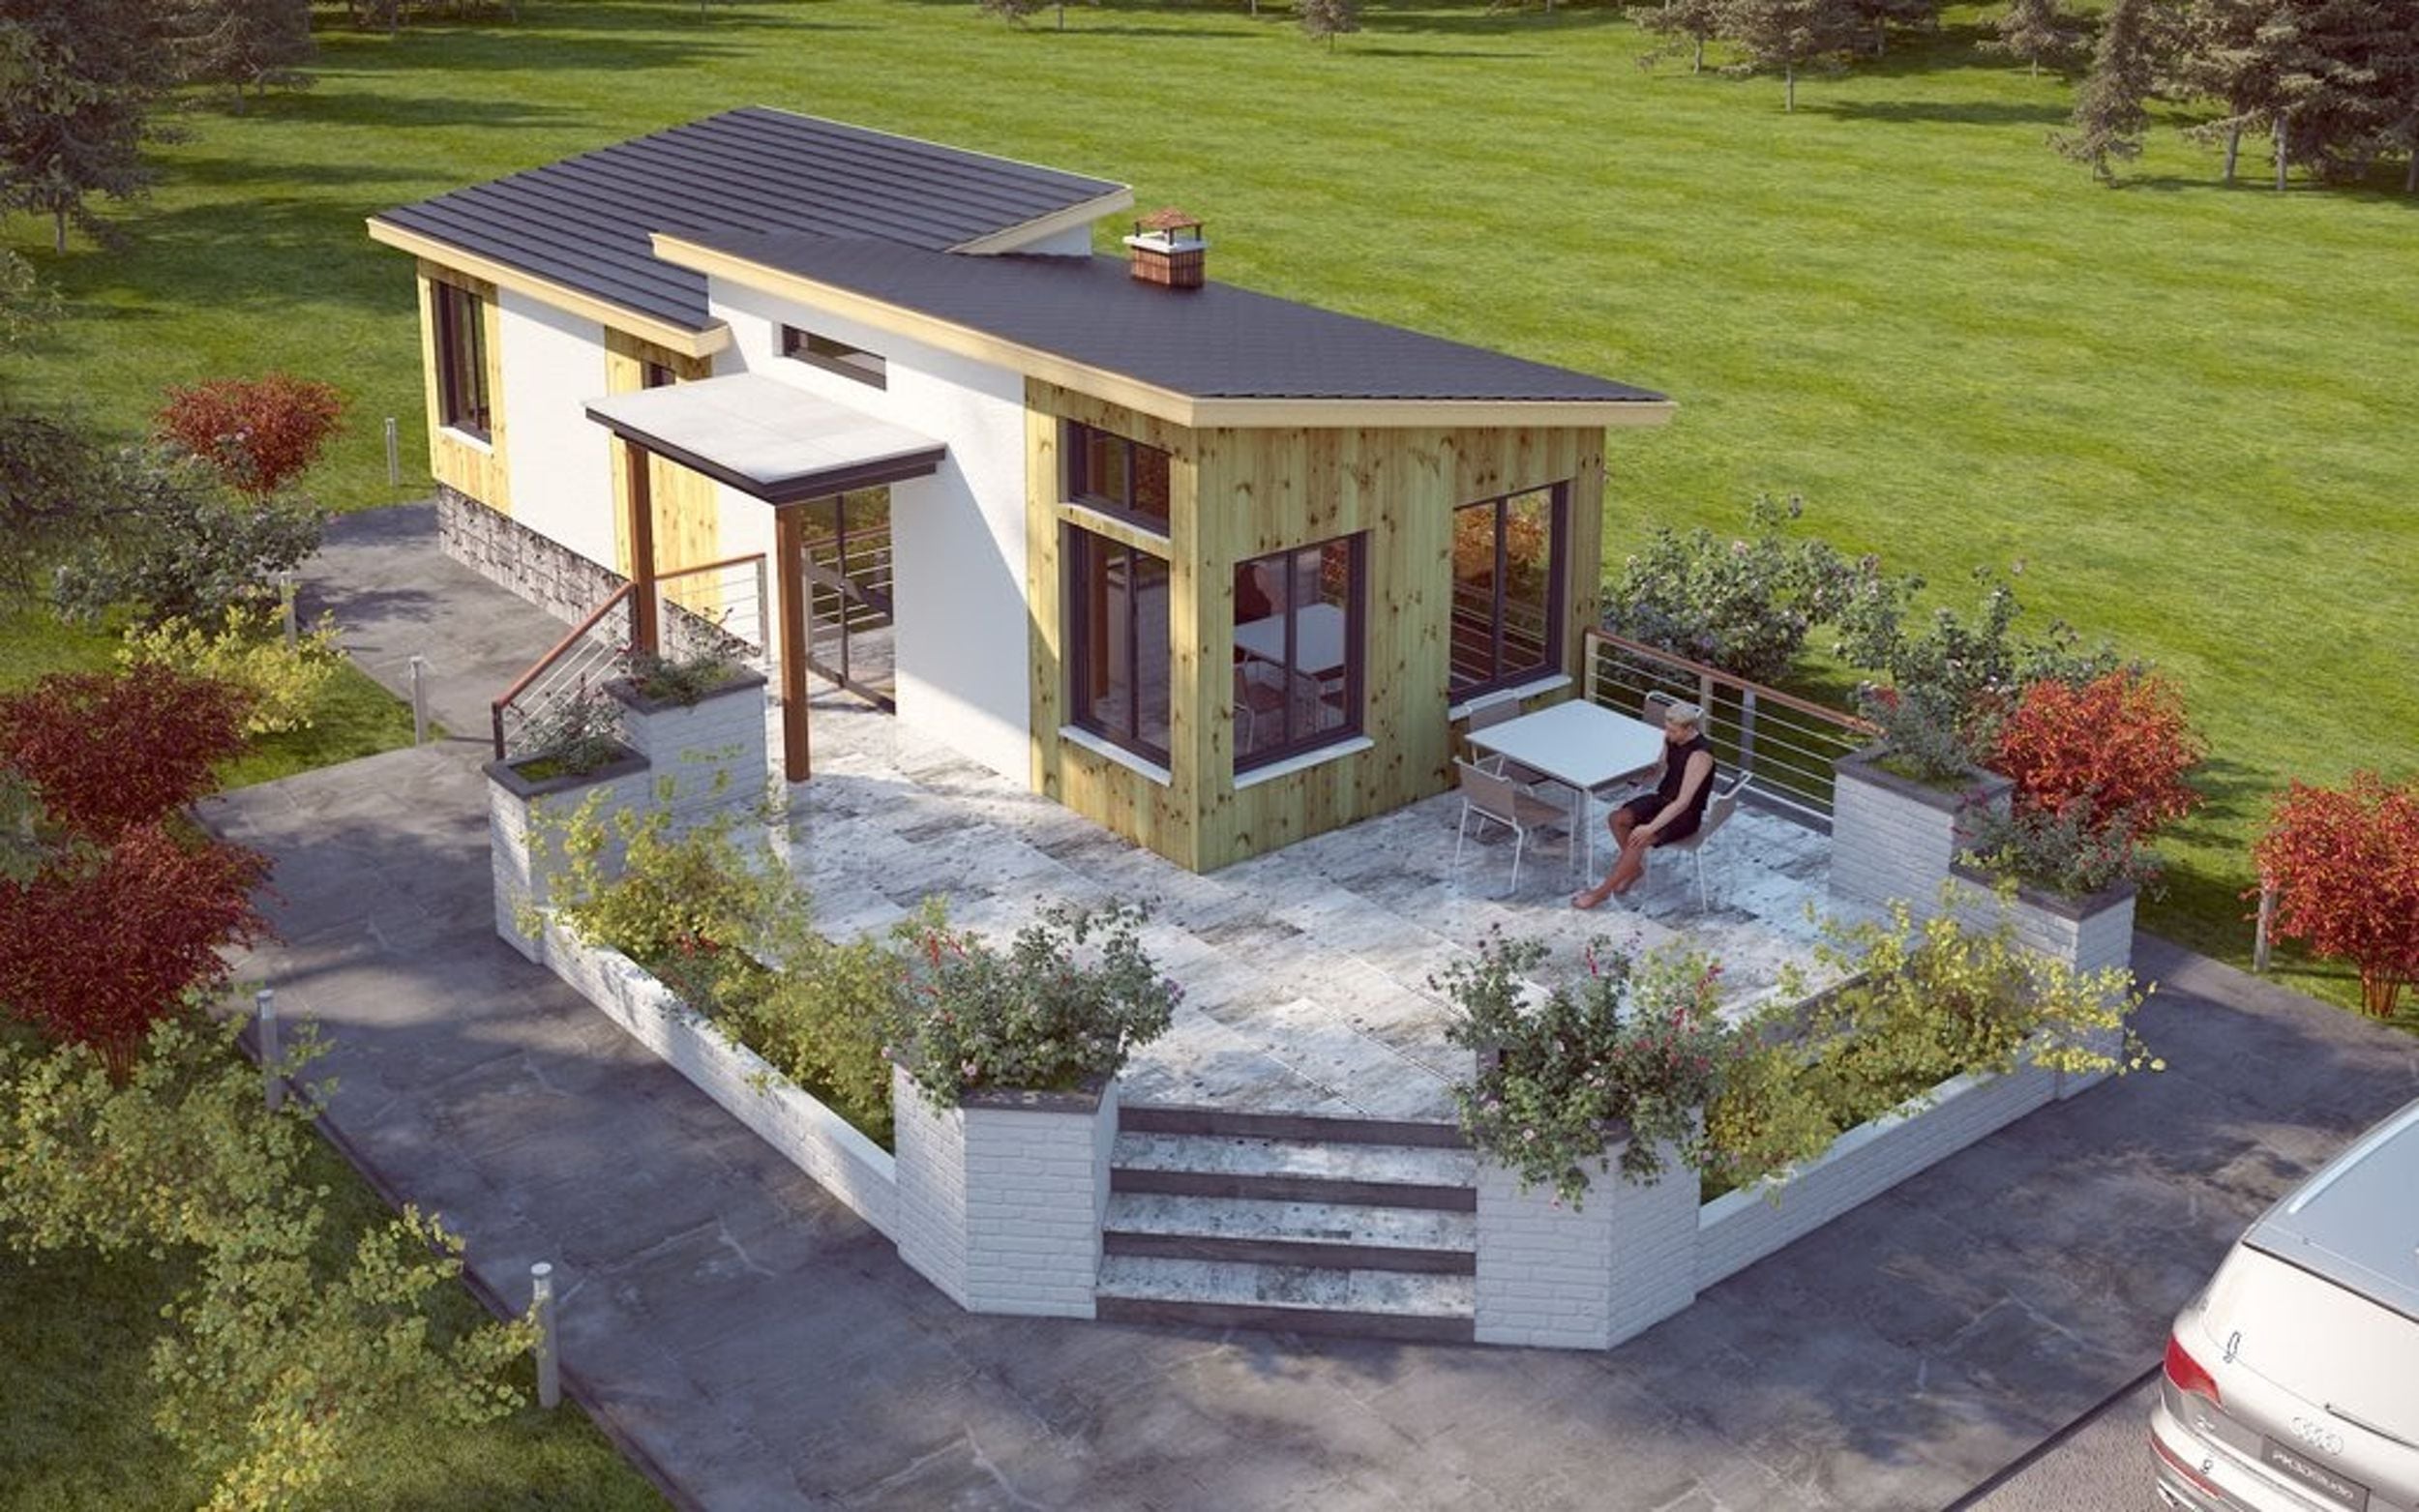 The Superiority Of Steel Ontario Company Builds Prefab Homes From